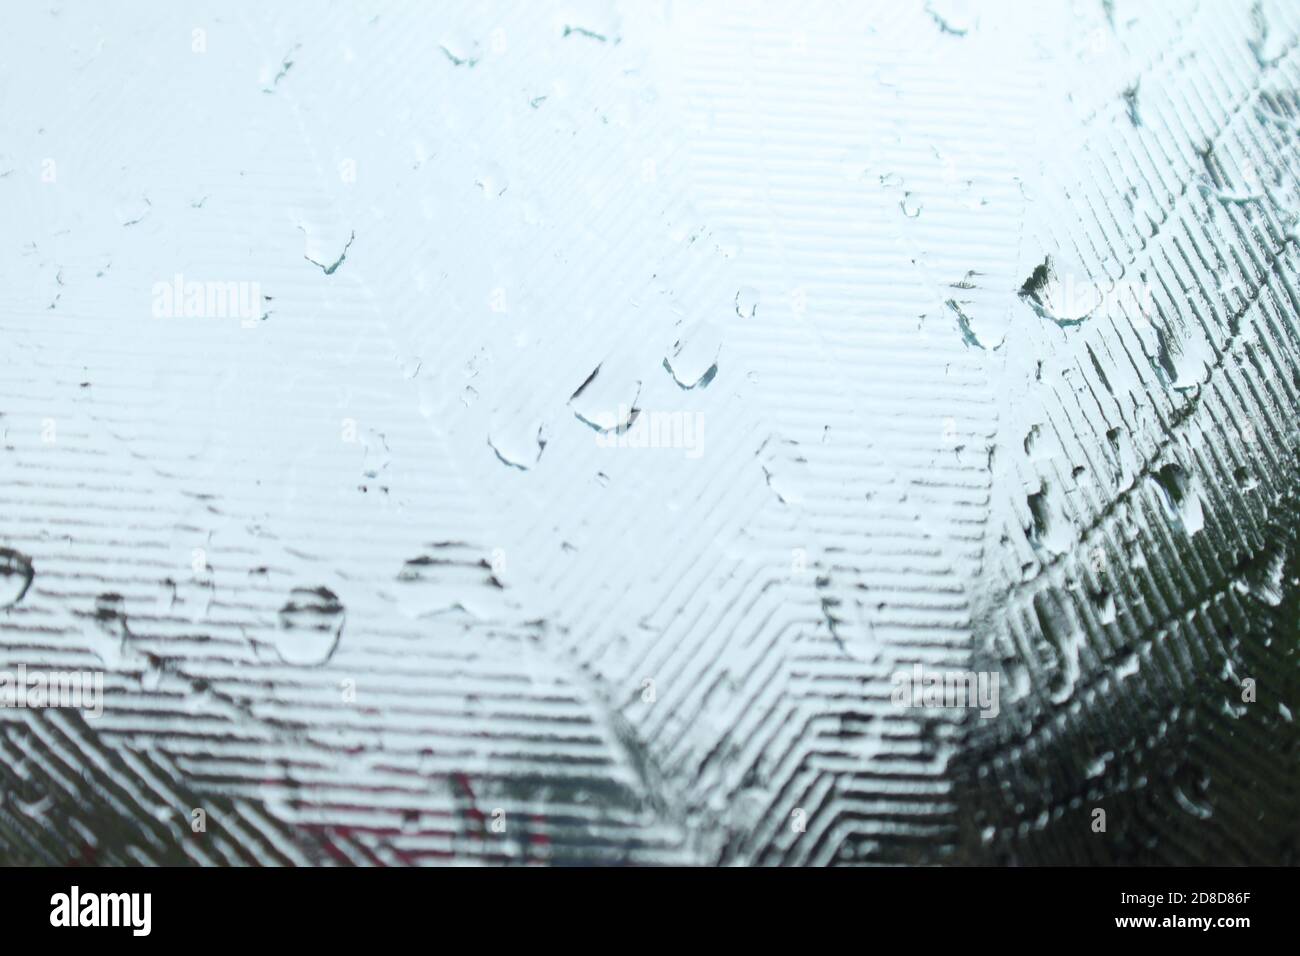 Rain water on a frosted glass window, abstract backgrounds Stock Photo